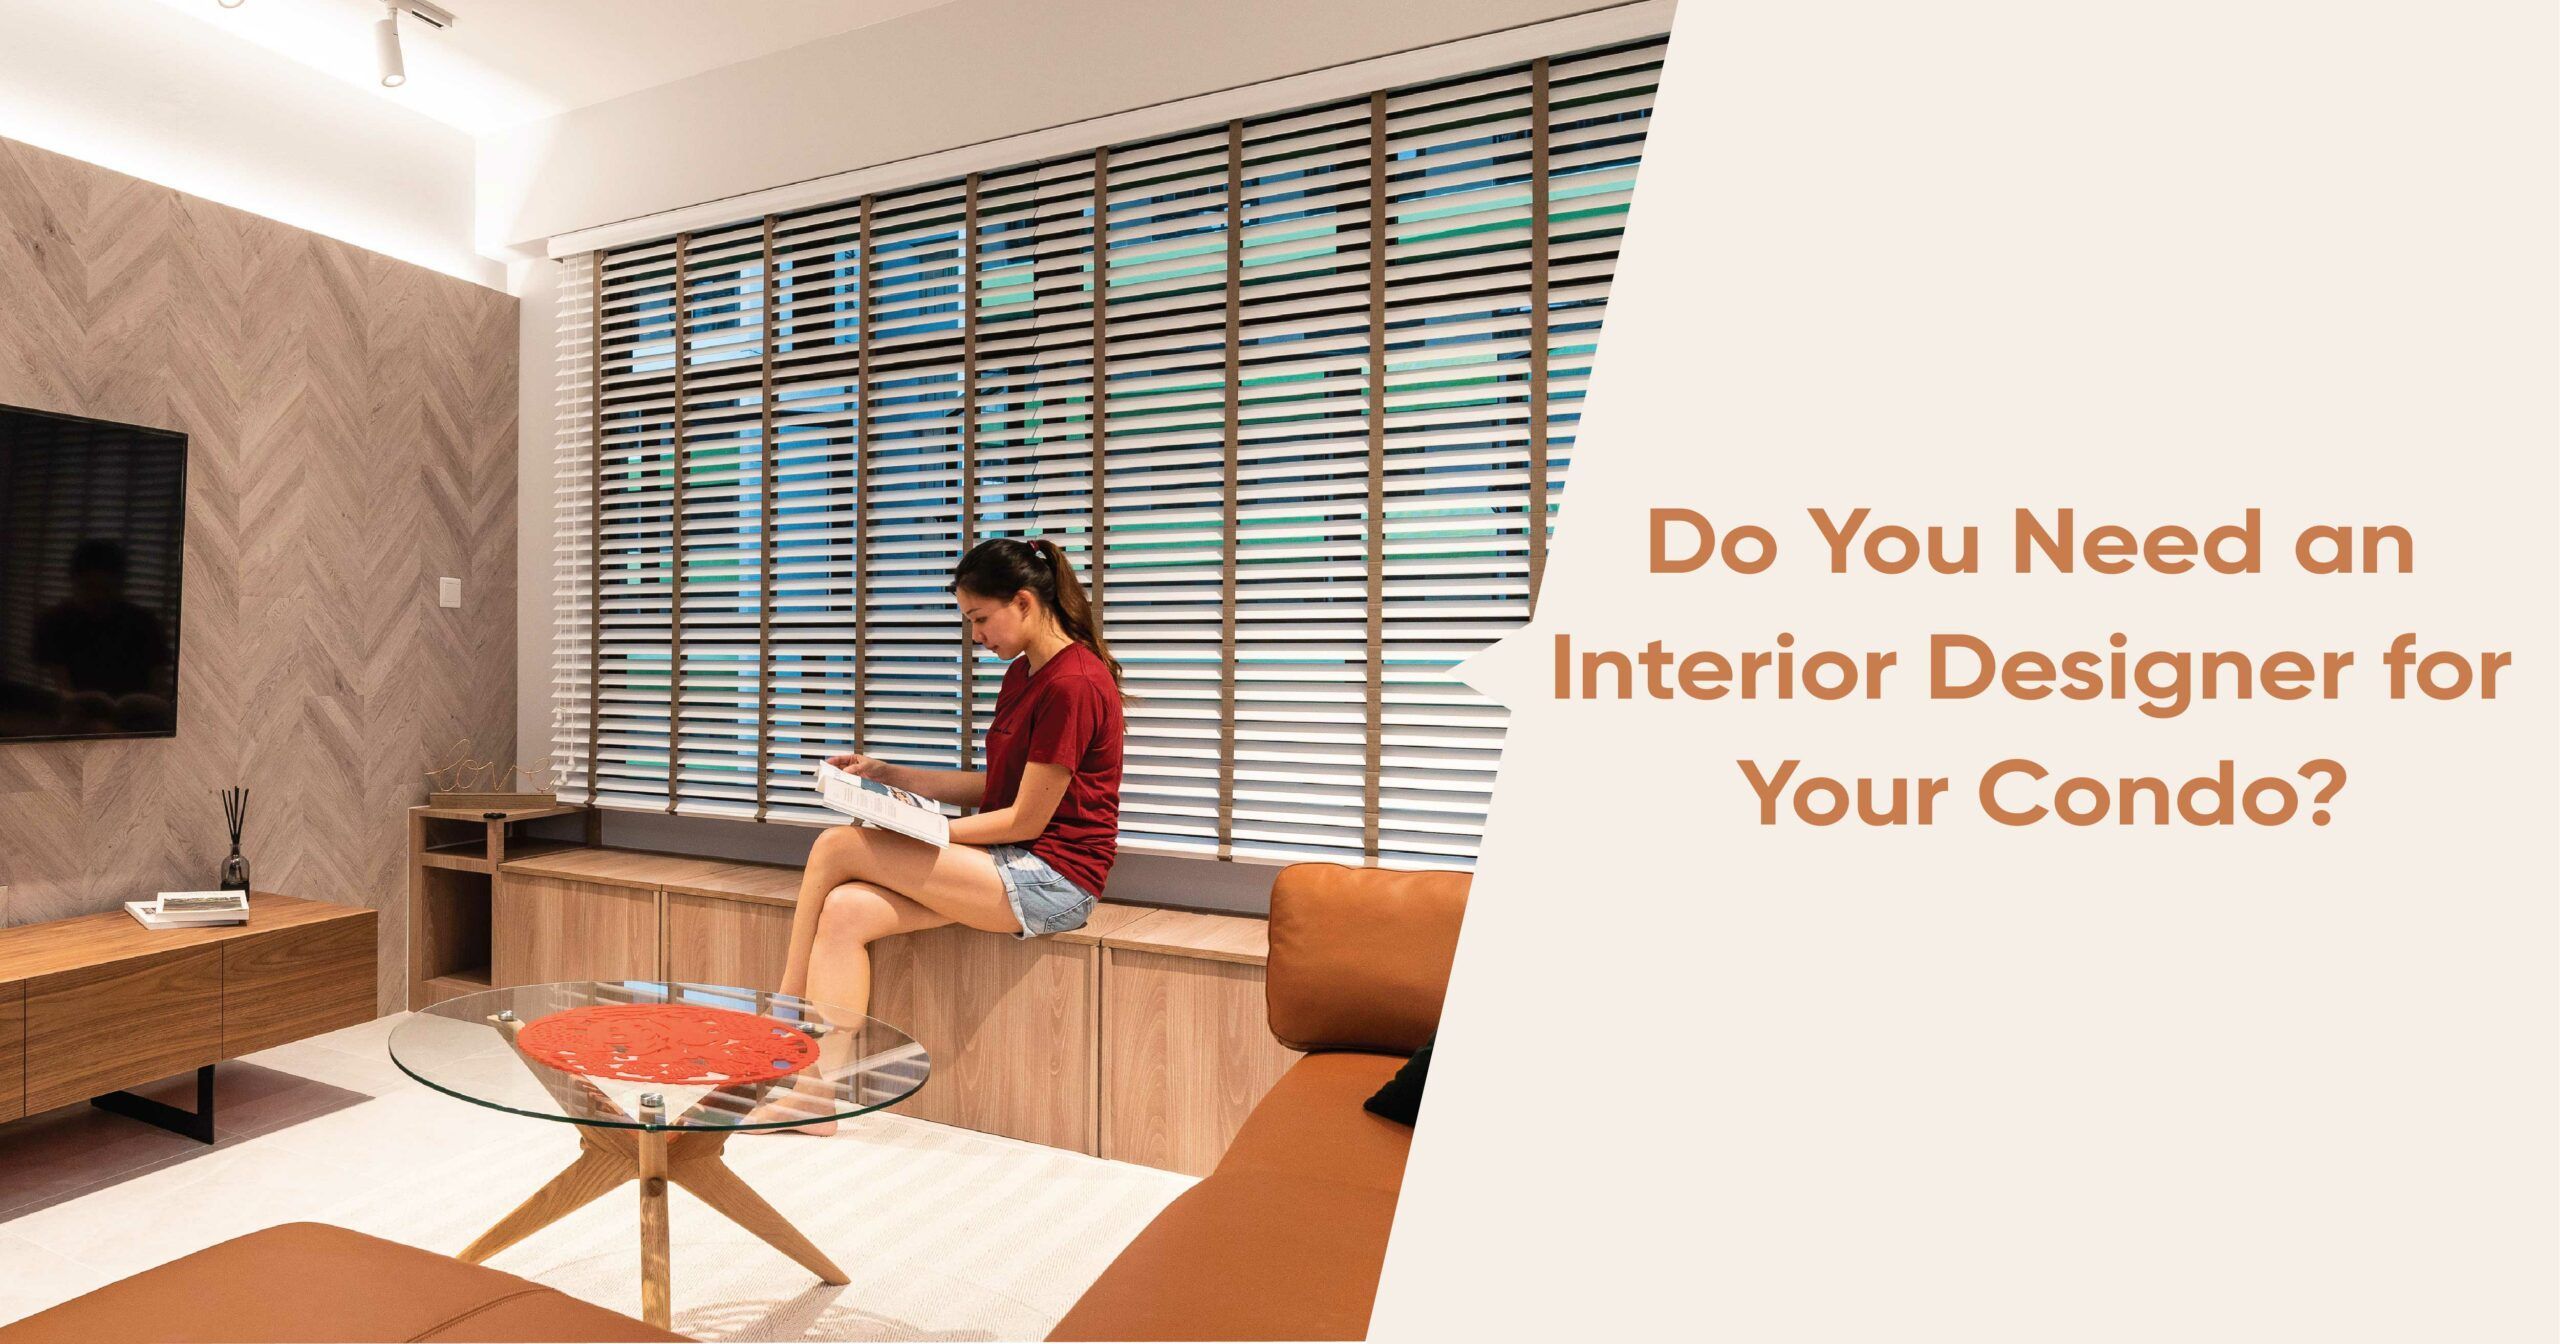 How Can an Interior Designer Help You With Your Condo?